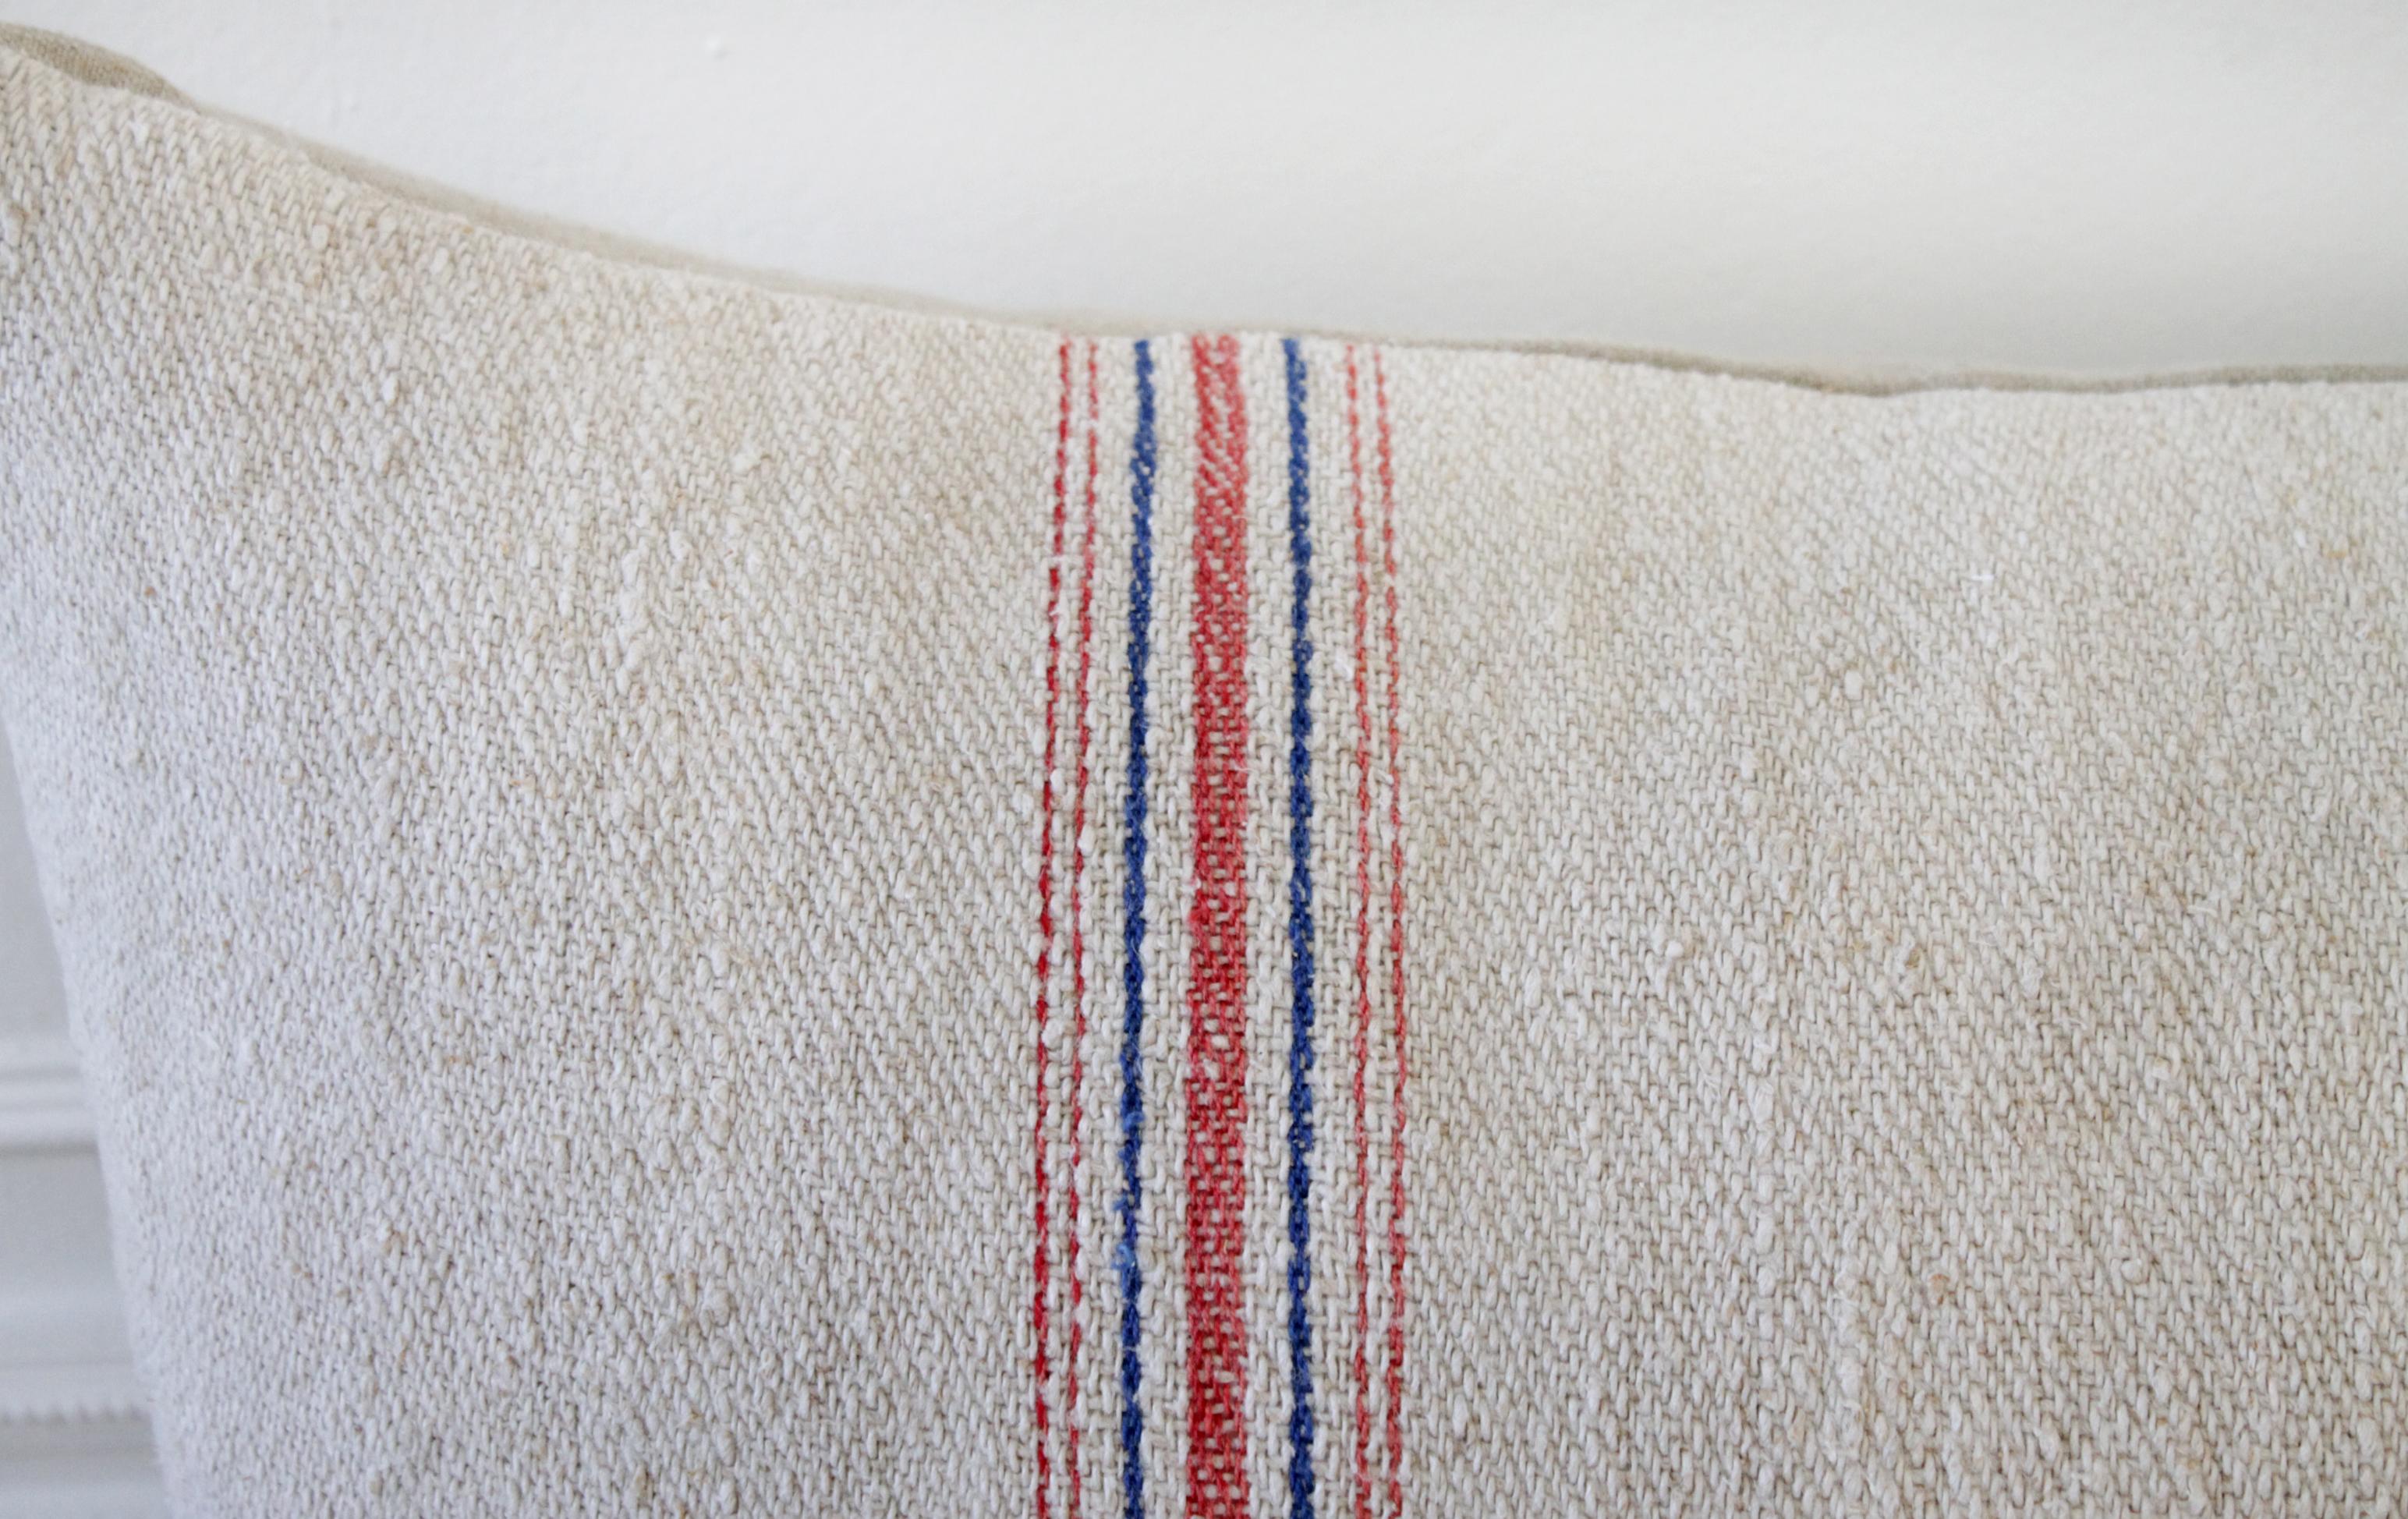 Vintage European grain sack pillows, custom made with a patchwork design. Oatmeal colored background, with red/blue stripes, and hidden zipper closure. Some grain sacks have original patchwork, and stitching. Please see photos. Inserts not